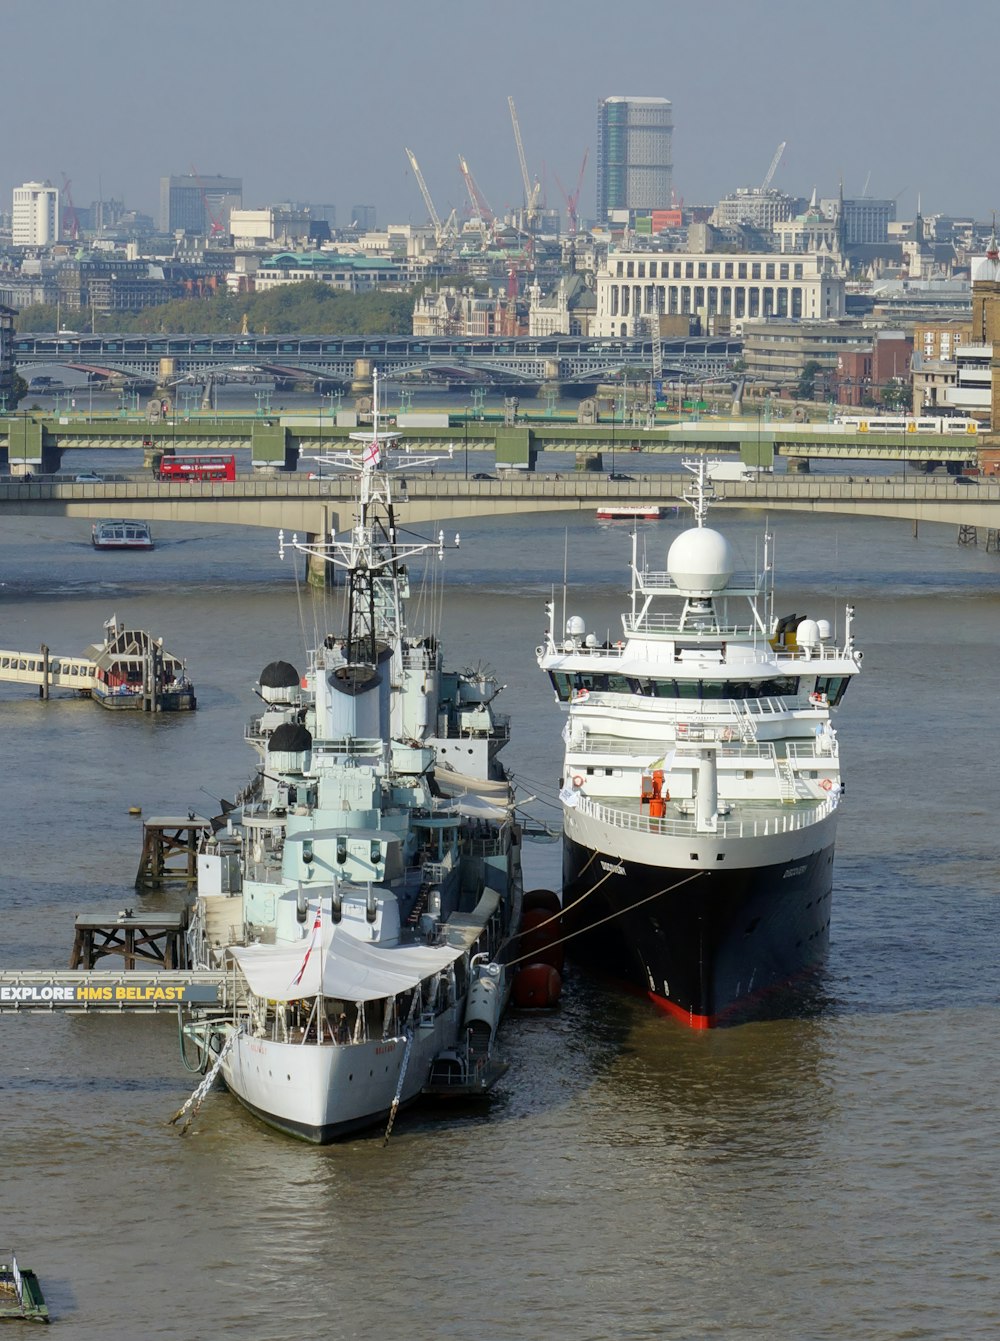 two large ships are docked in the water